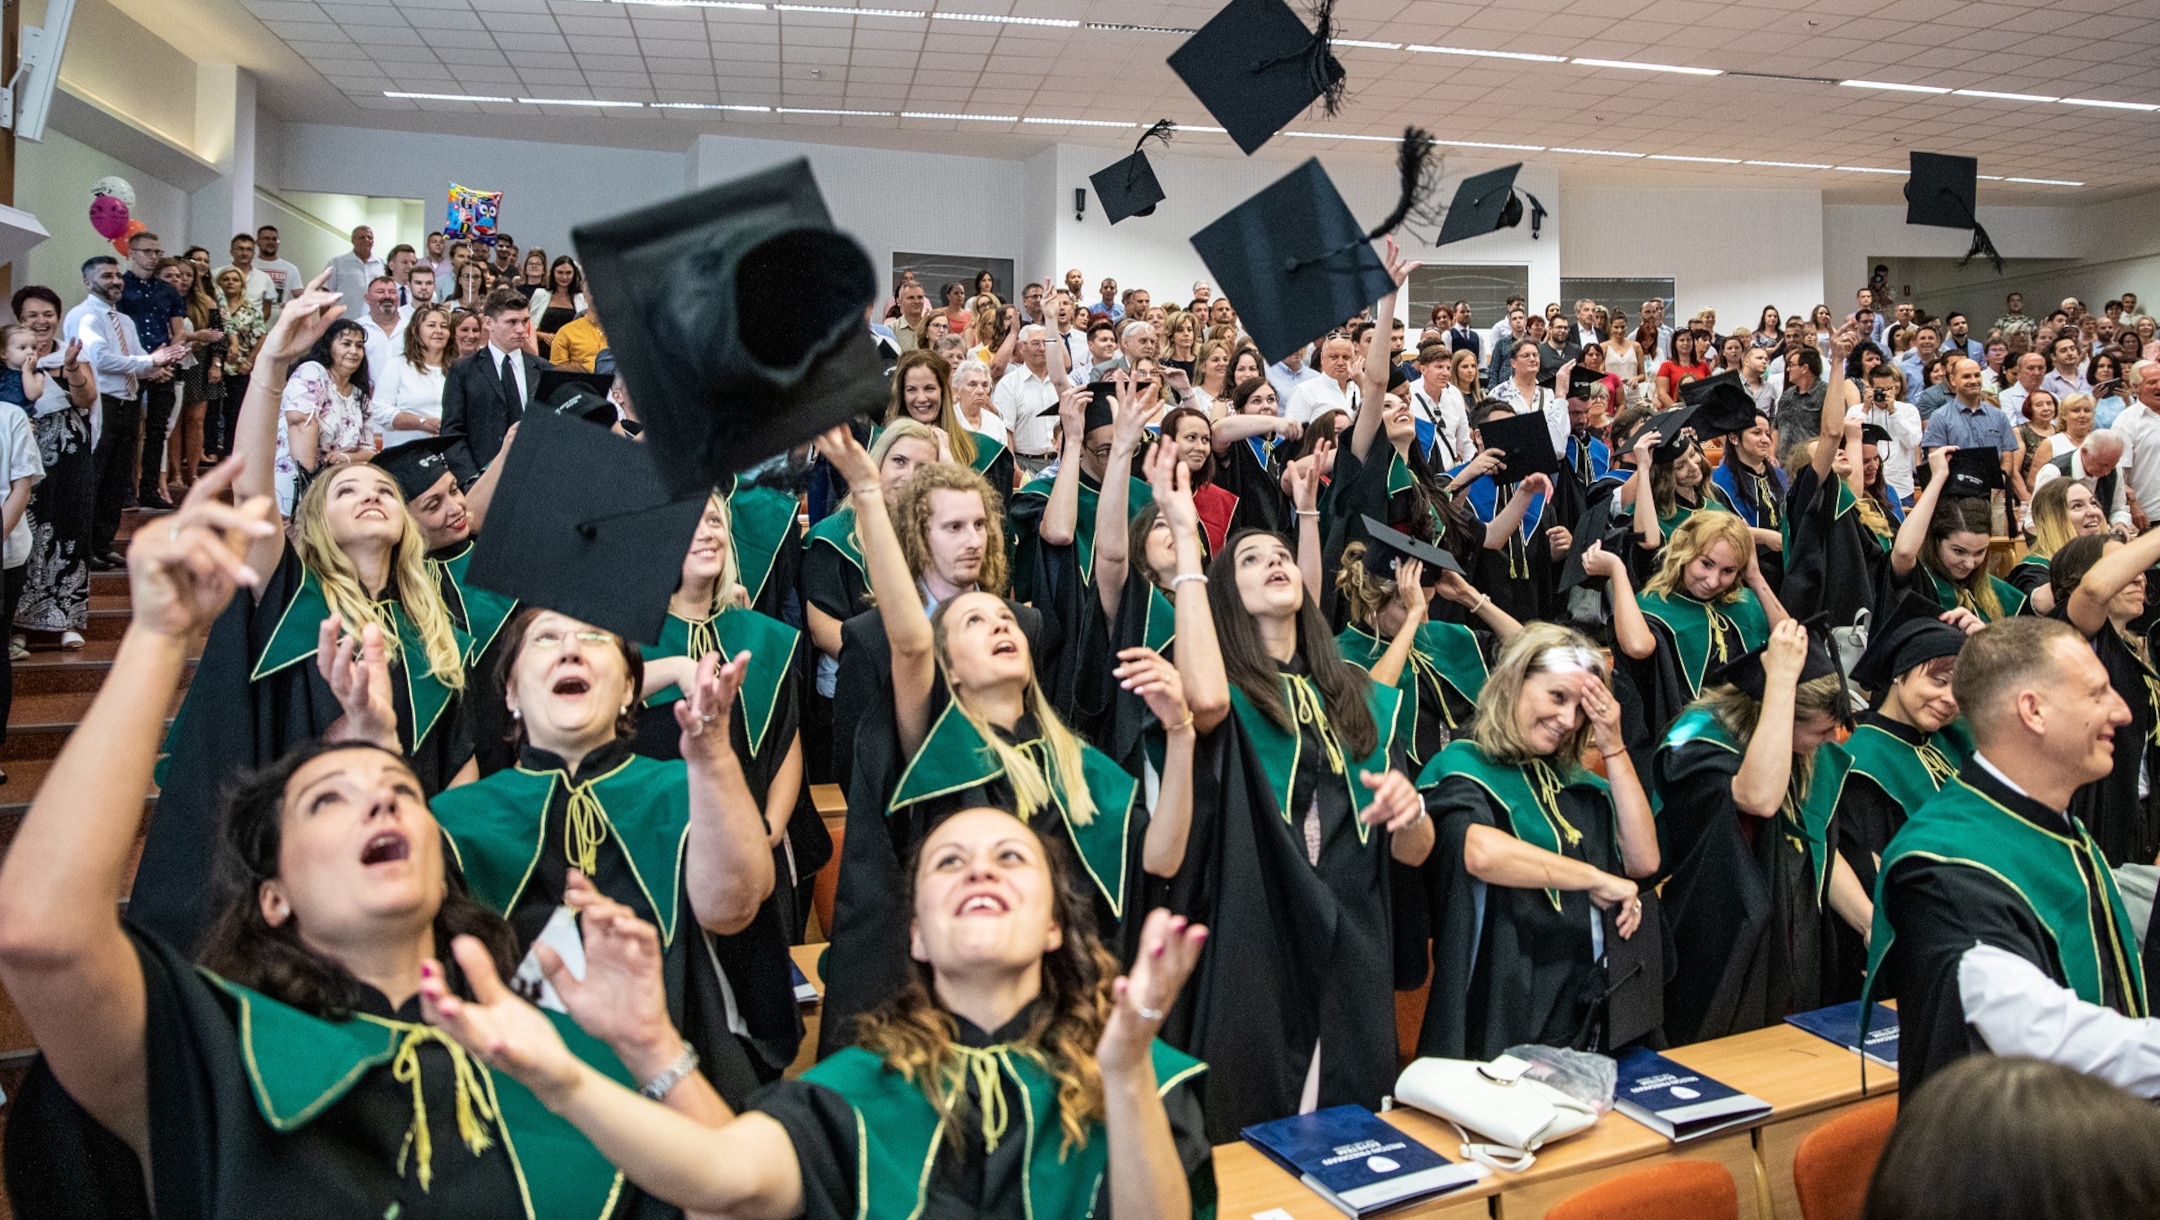 Students and faculty attend a graduation ceremony at Milton Friedman University in Budapest, Hungary, July 23, 2019. (courtesy of Milton Freidman University)